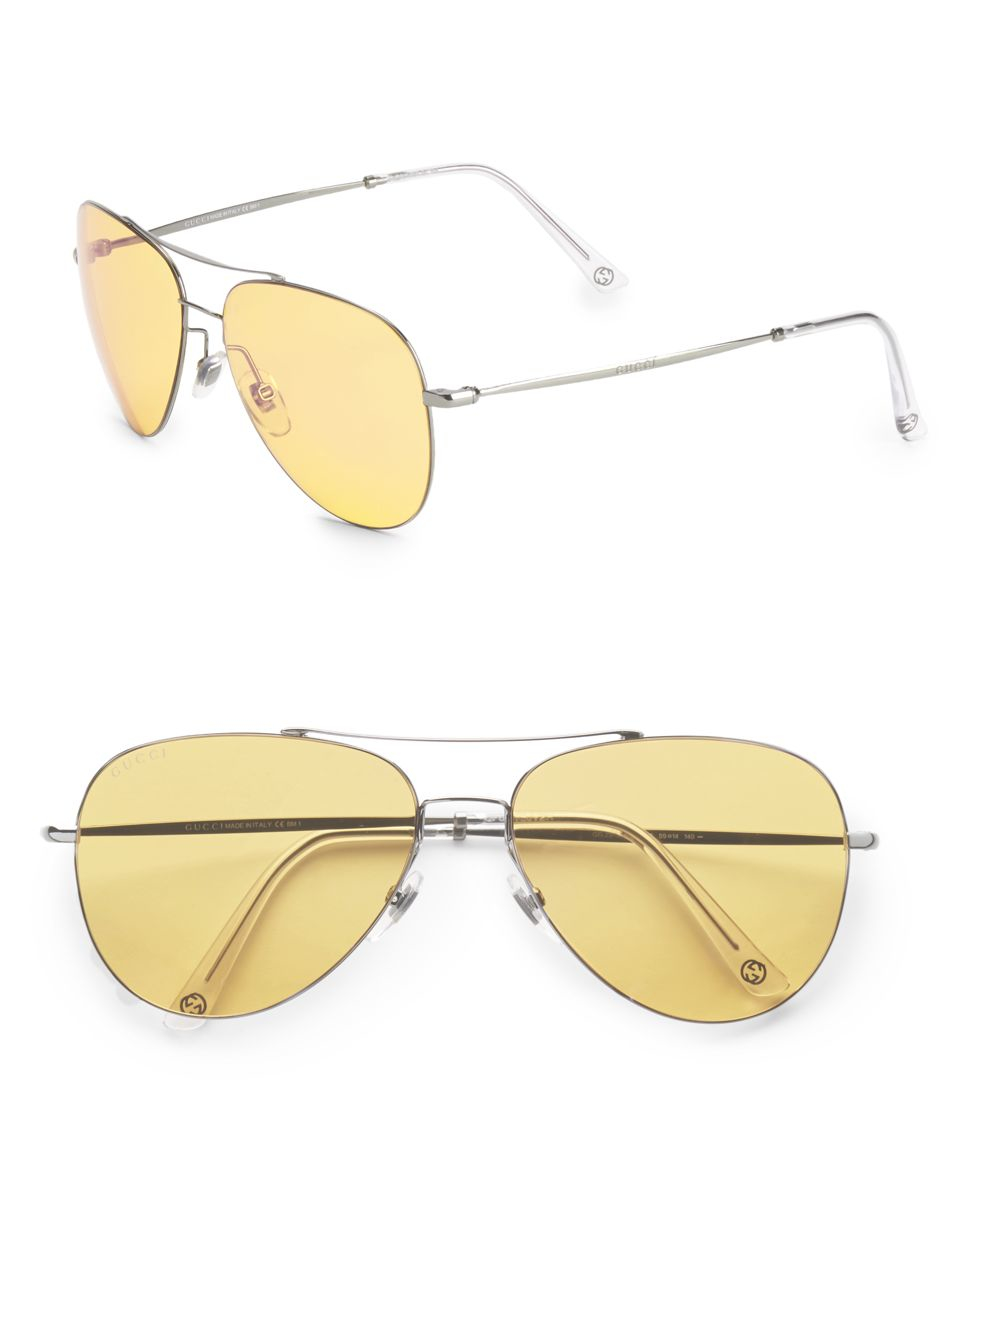 Gucci Aviator Sunglasses Yellow Clearance, SAVE 55% - icarus.photos